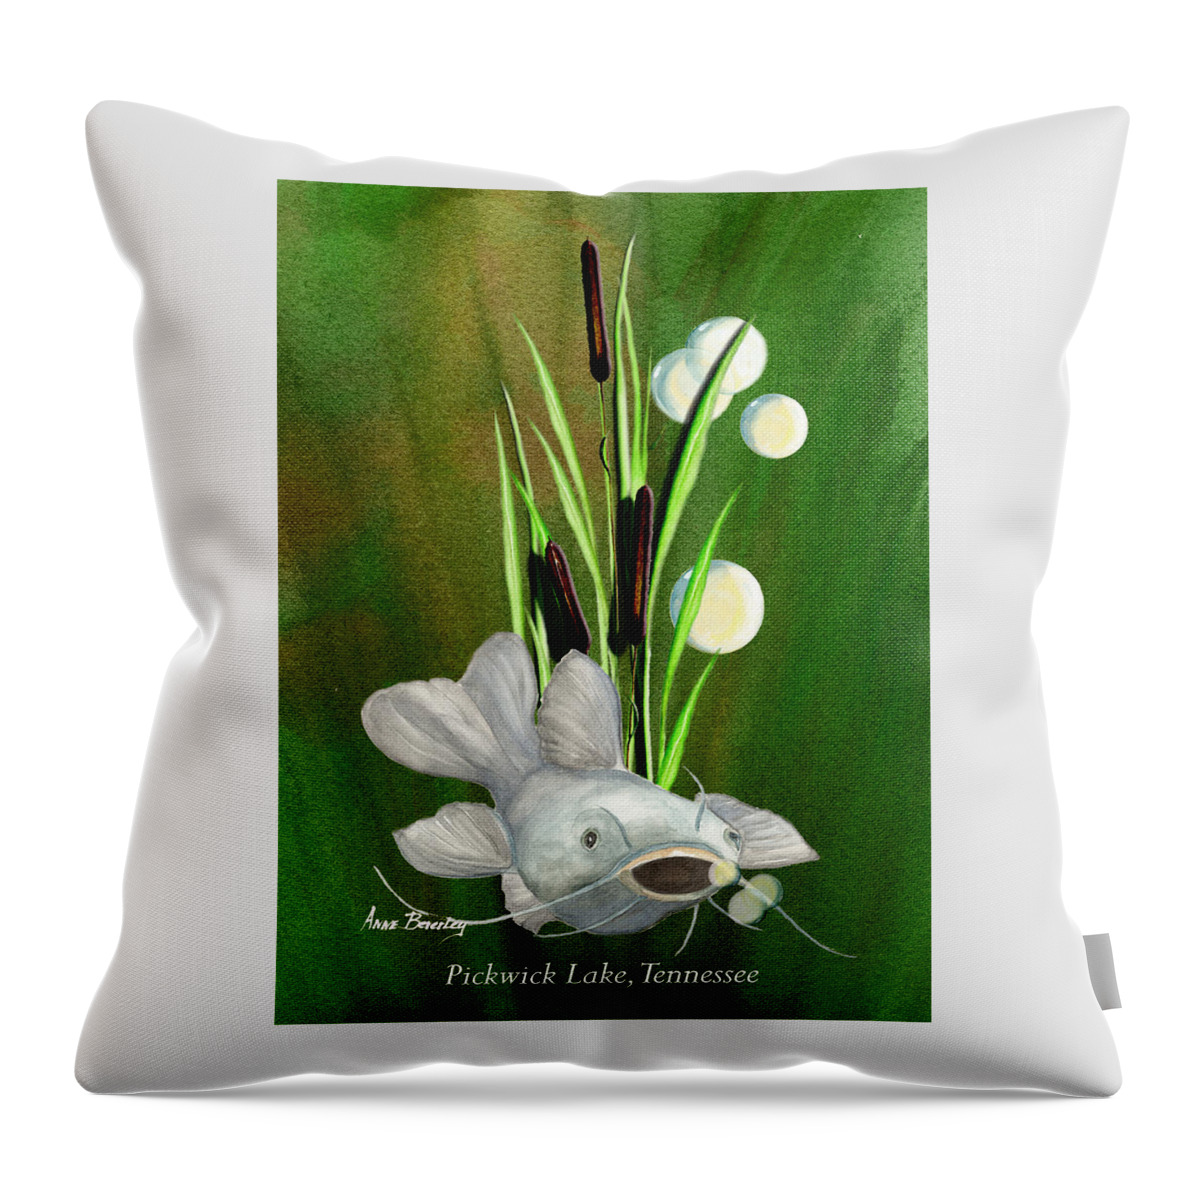 Catfish Throw Pillow featuring the painting Catfish At Pickwick Lake by Anne Beverley-Stamps